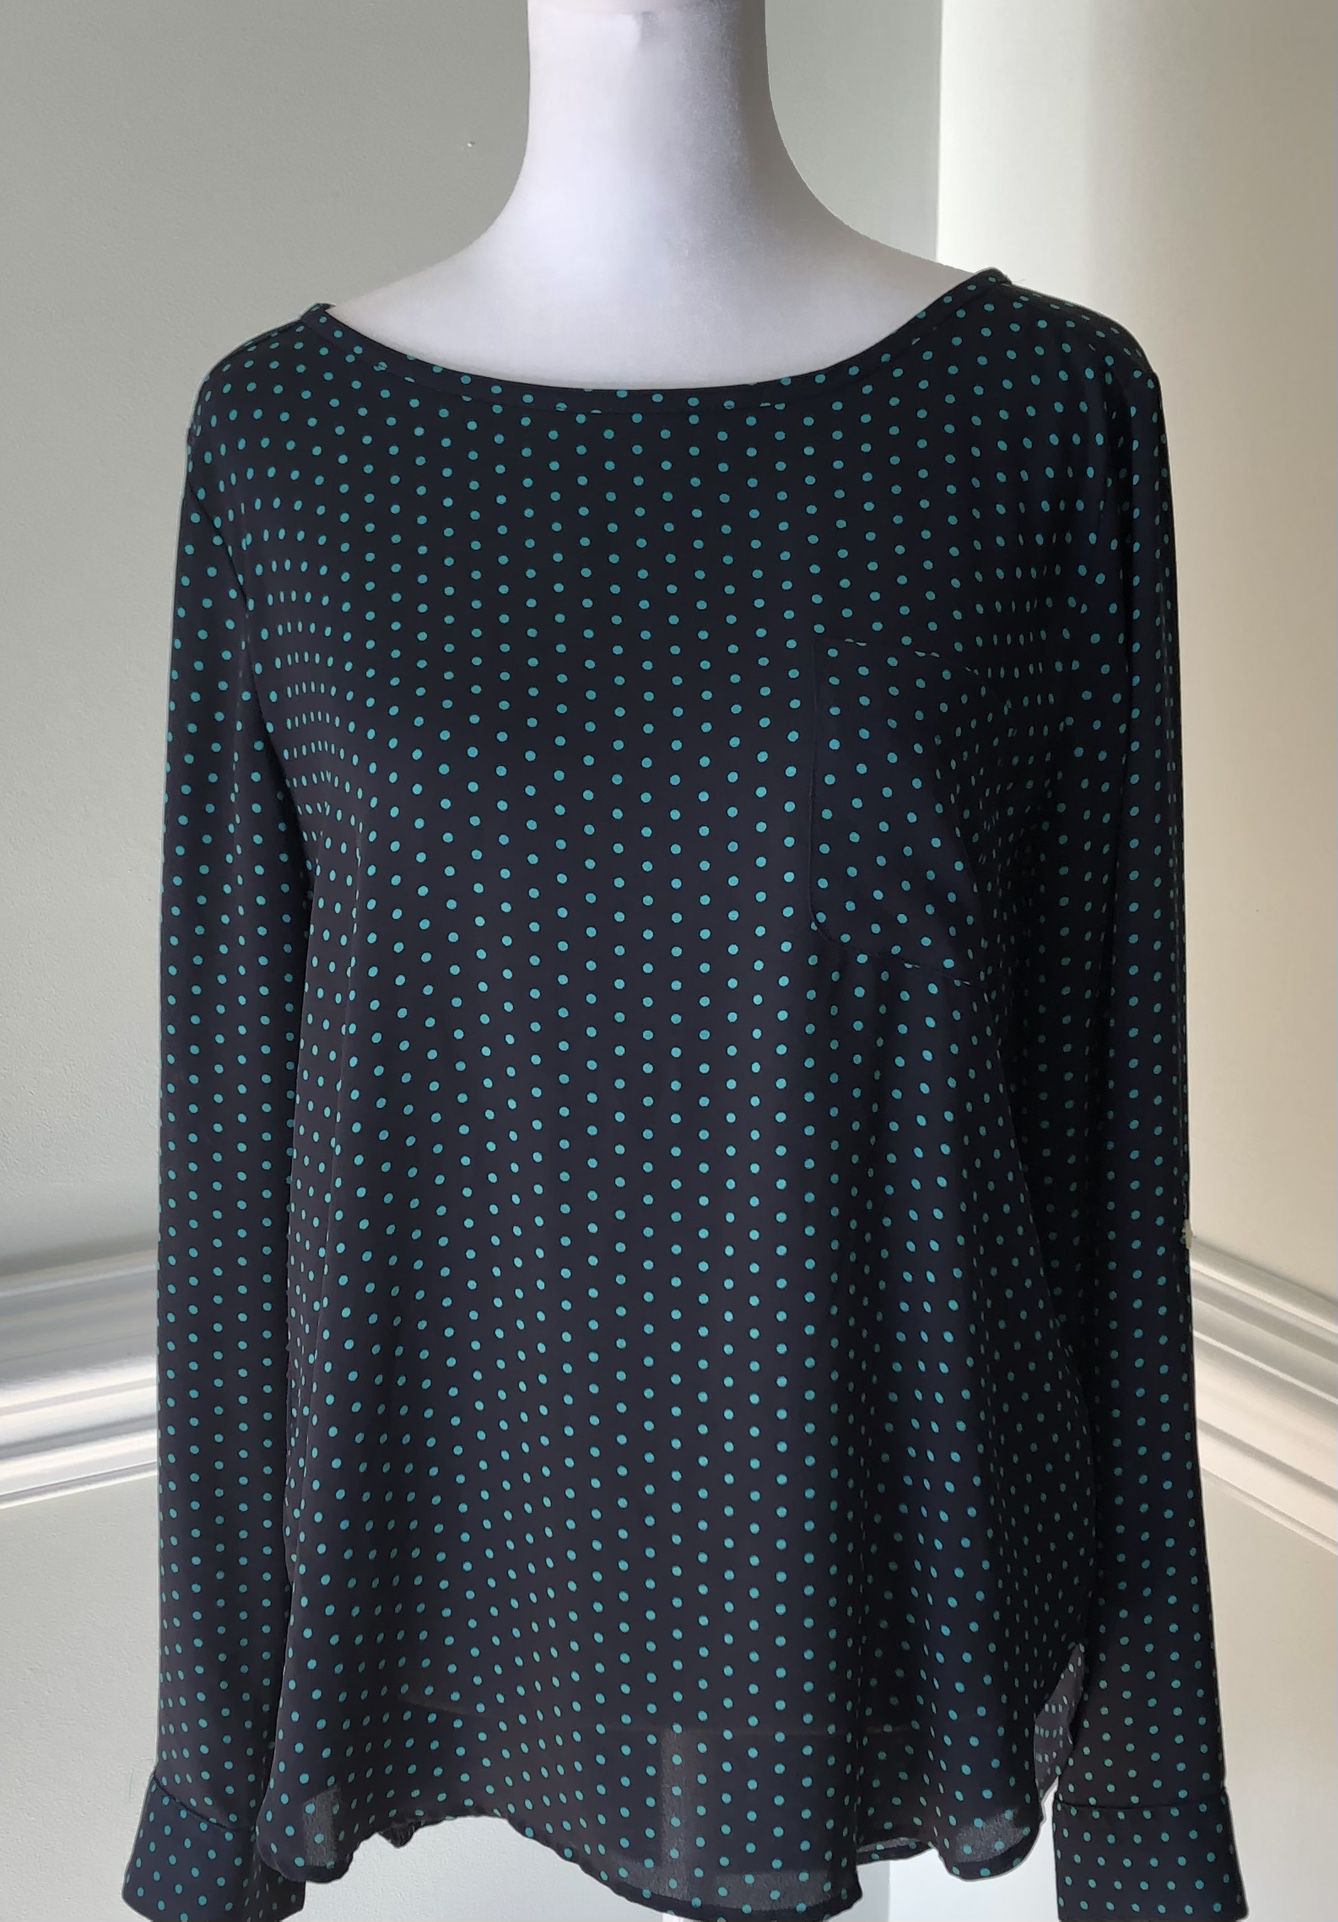 Women’s Long Sleeve Scoop Neck Blouse in Navy + Green Polka Dots from Ann Taylor Lift 